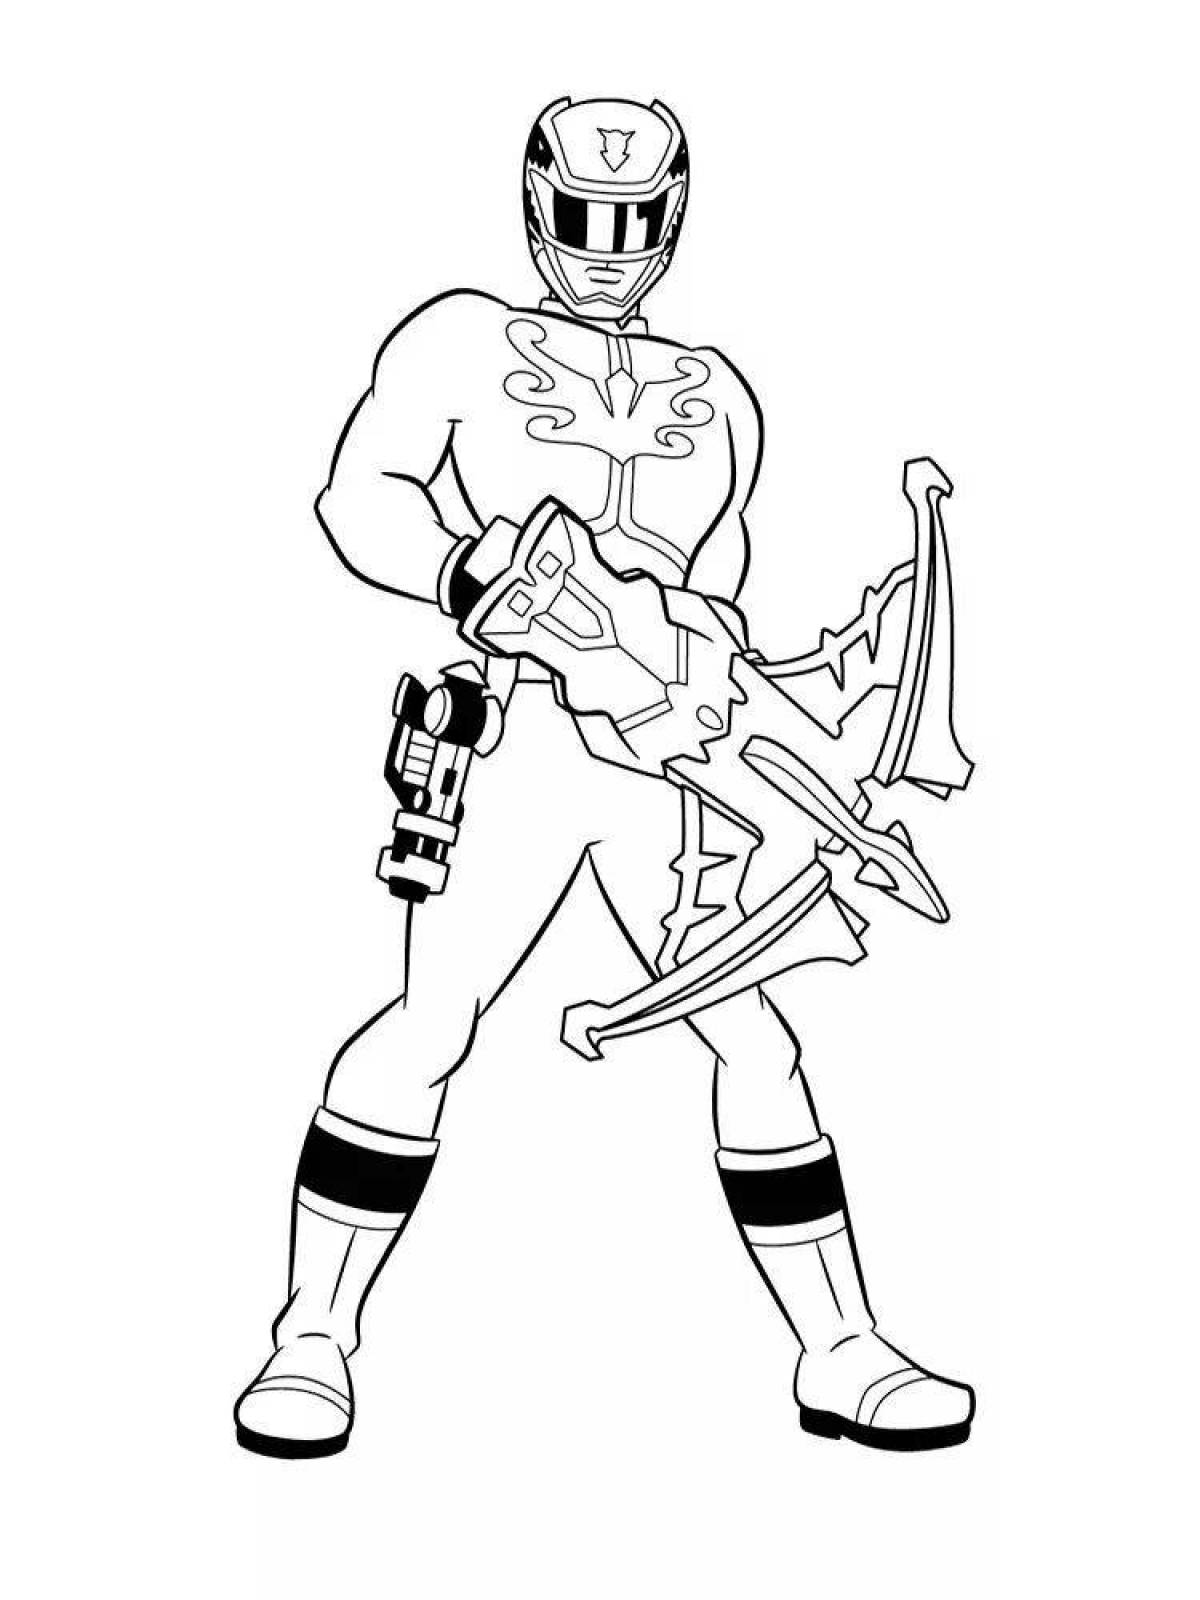 Playful power ranger coloring page